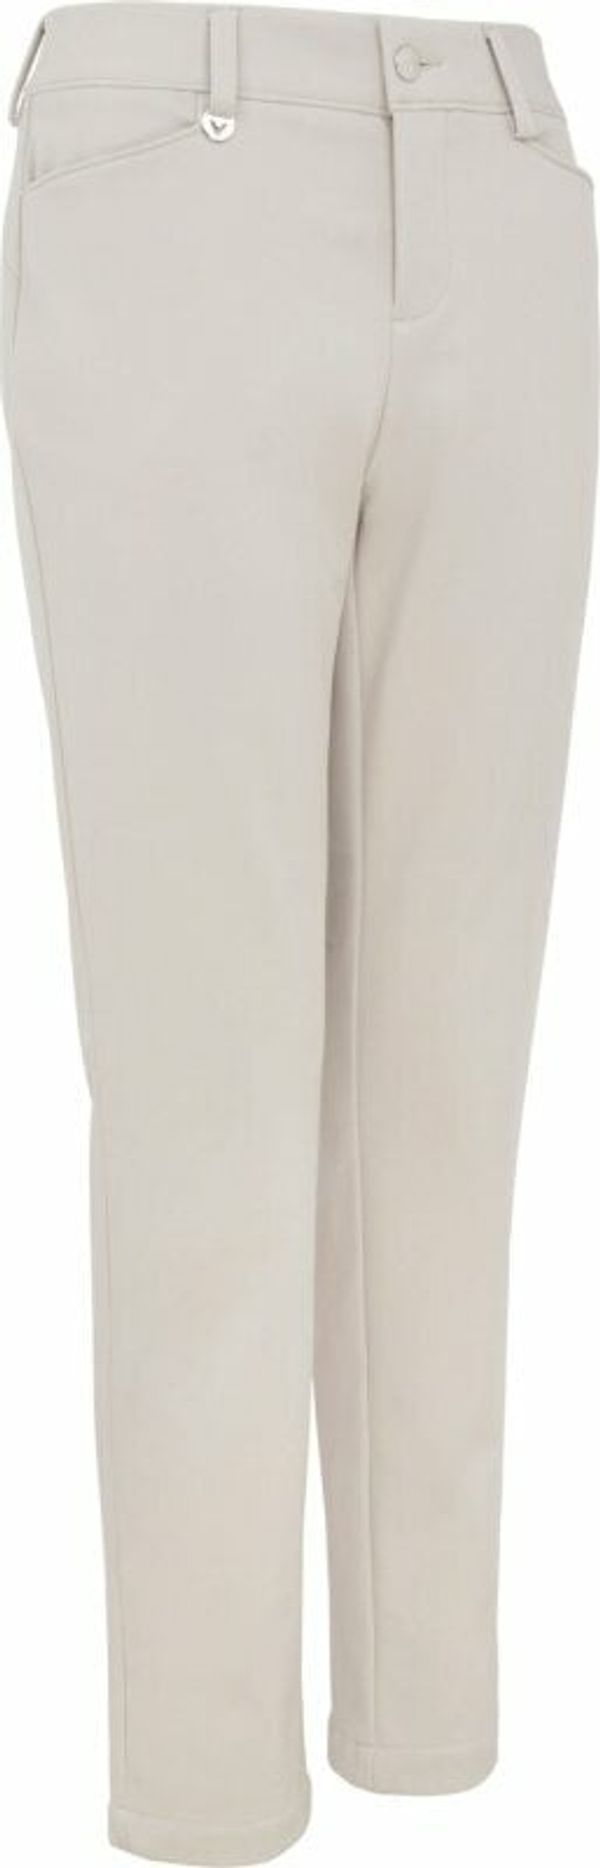 Callaway Callaway Thermal Womens Trousers Chateau Gray 10/29